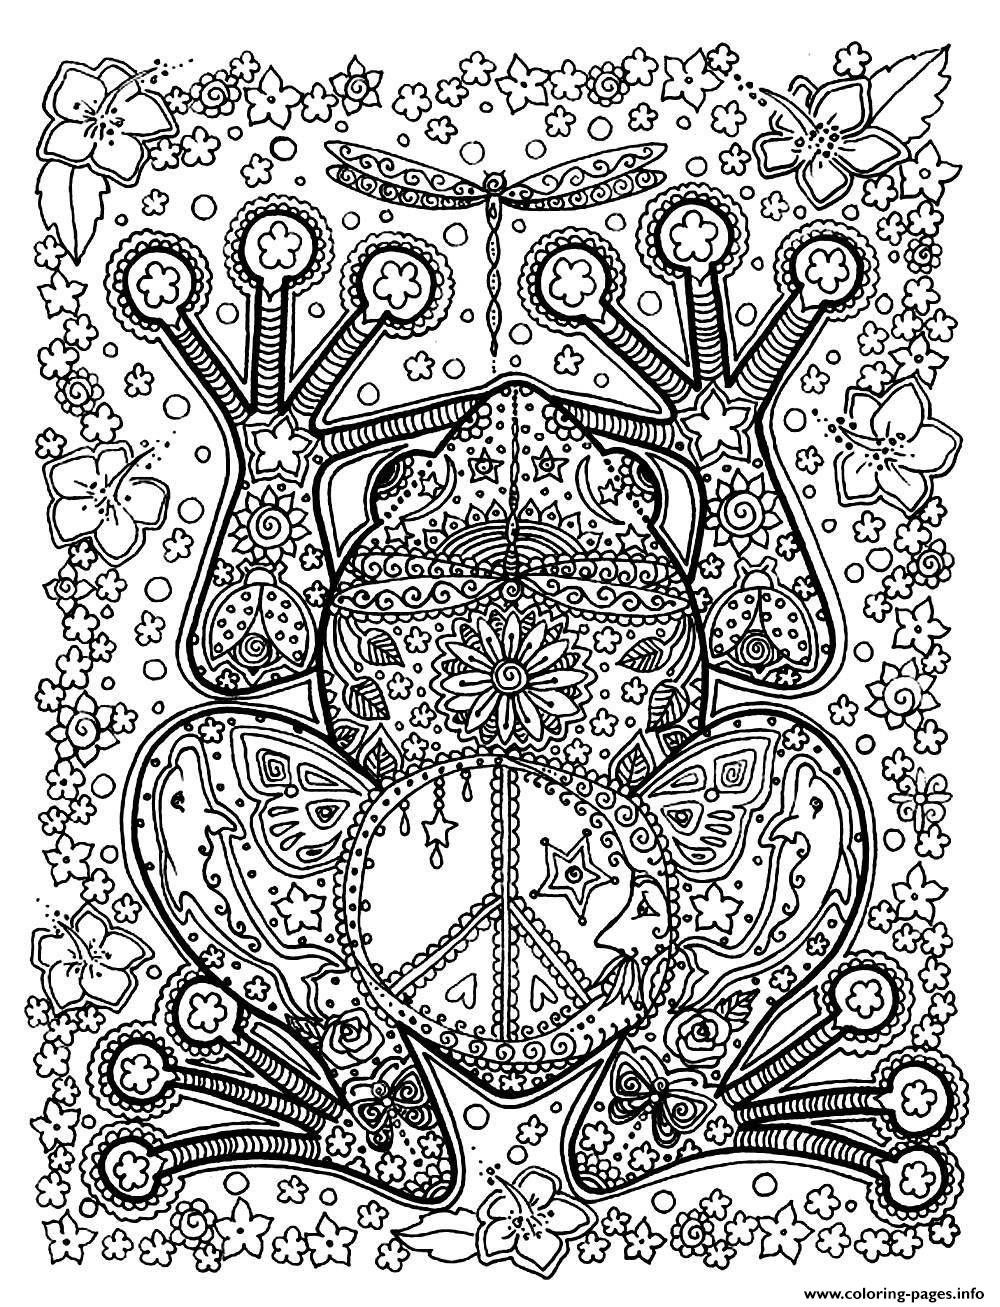 Big Adult Coloring Books
 Animal Coloring Pages For Adults Printable